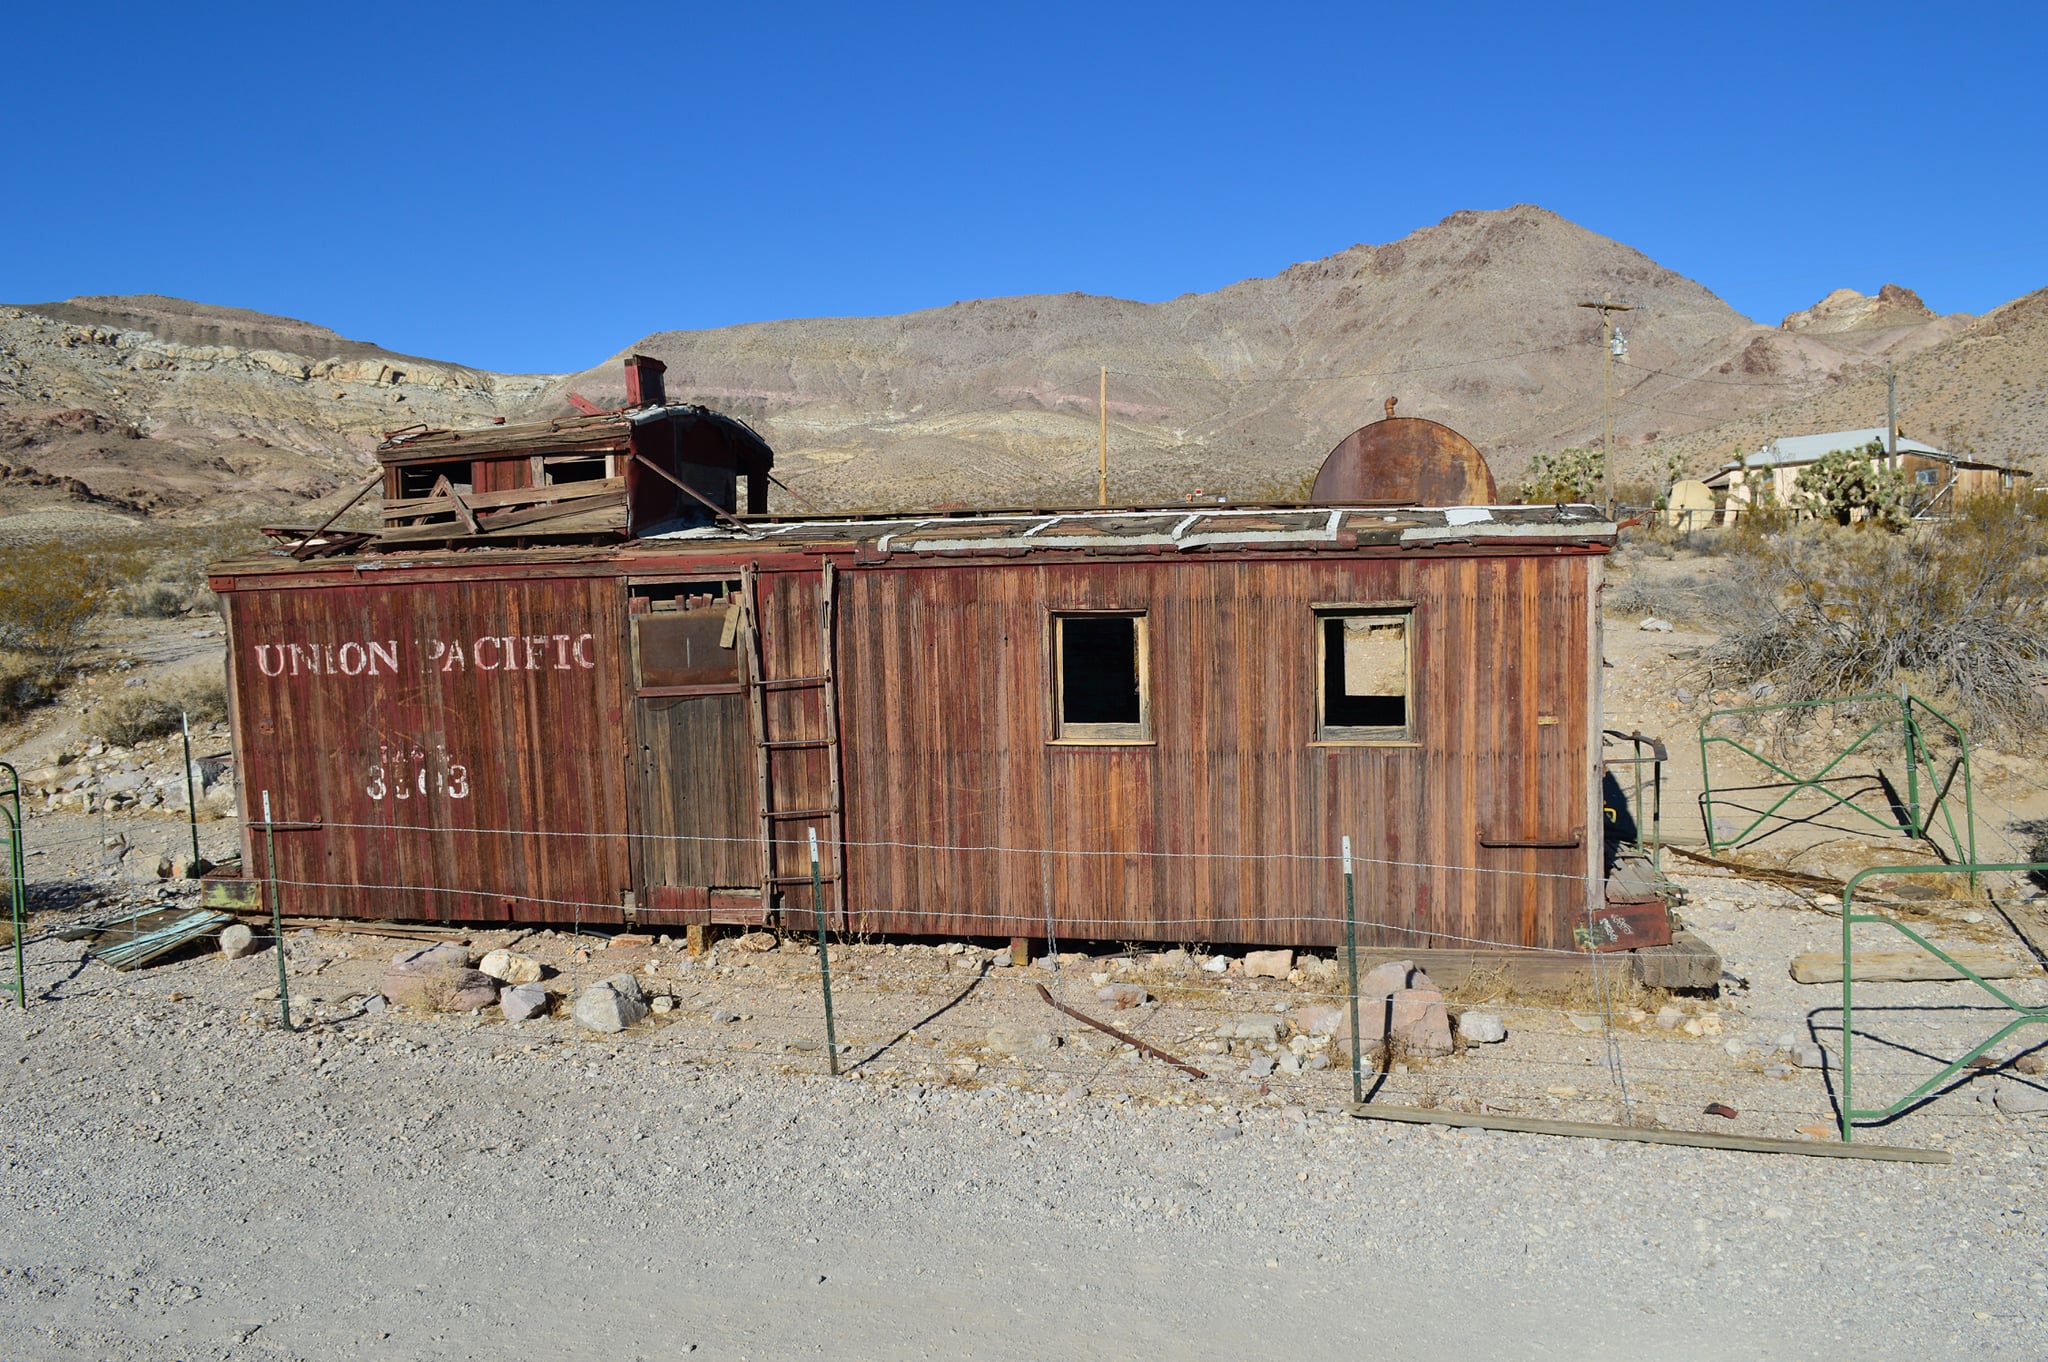 Union Pacific's office